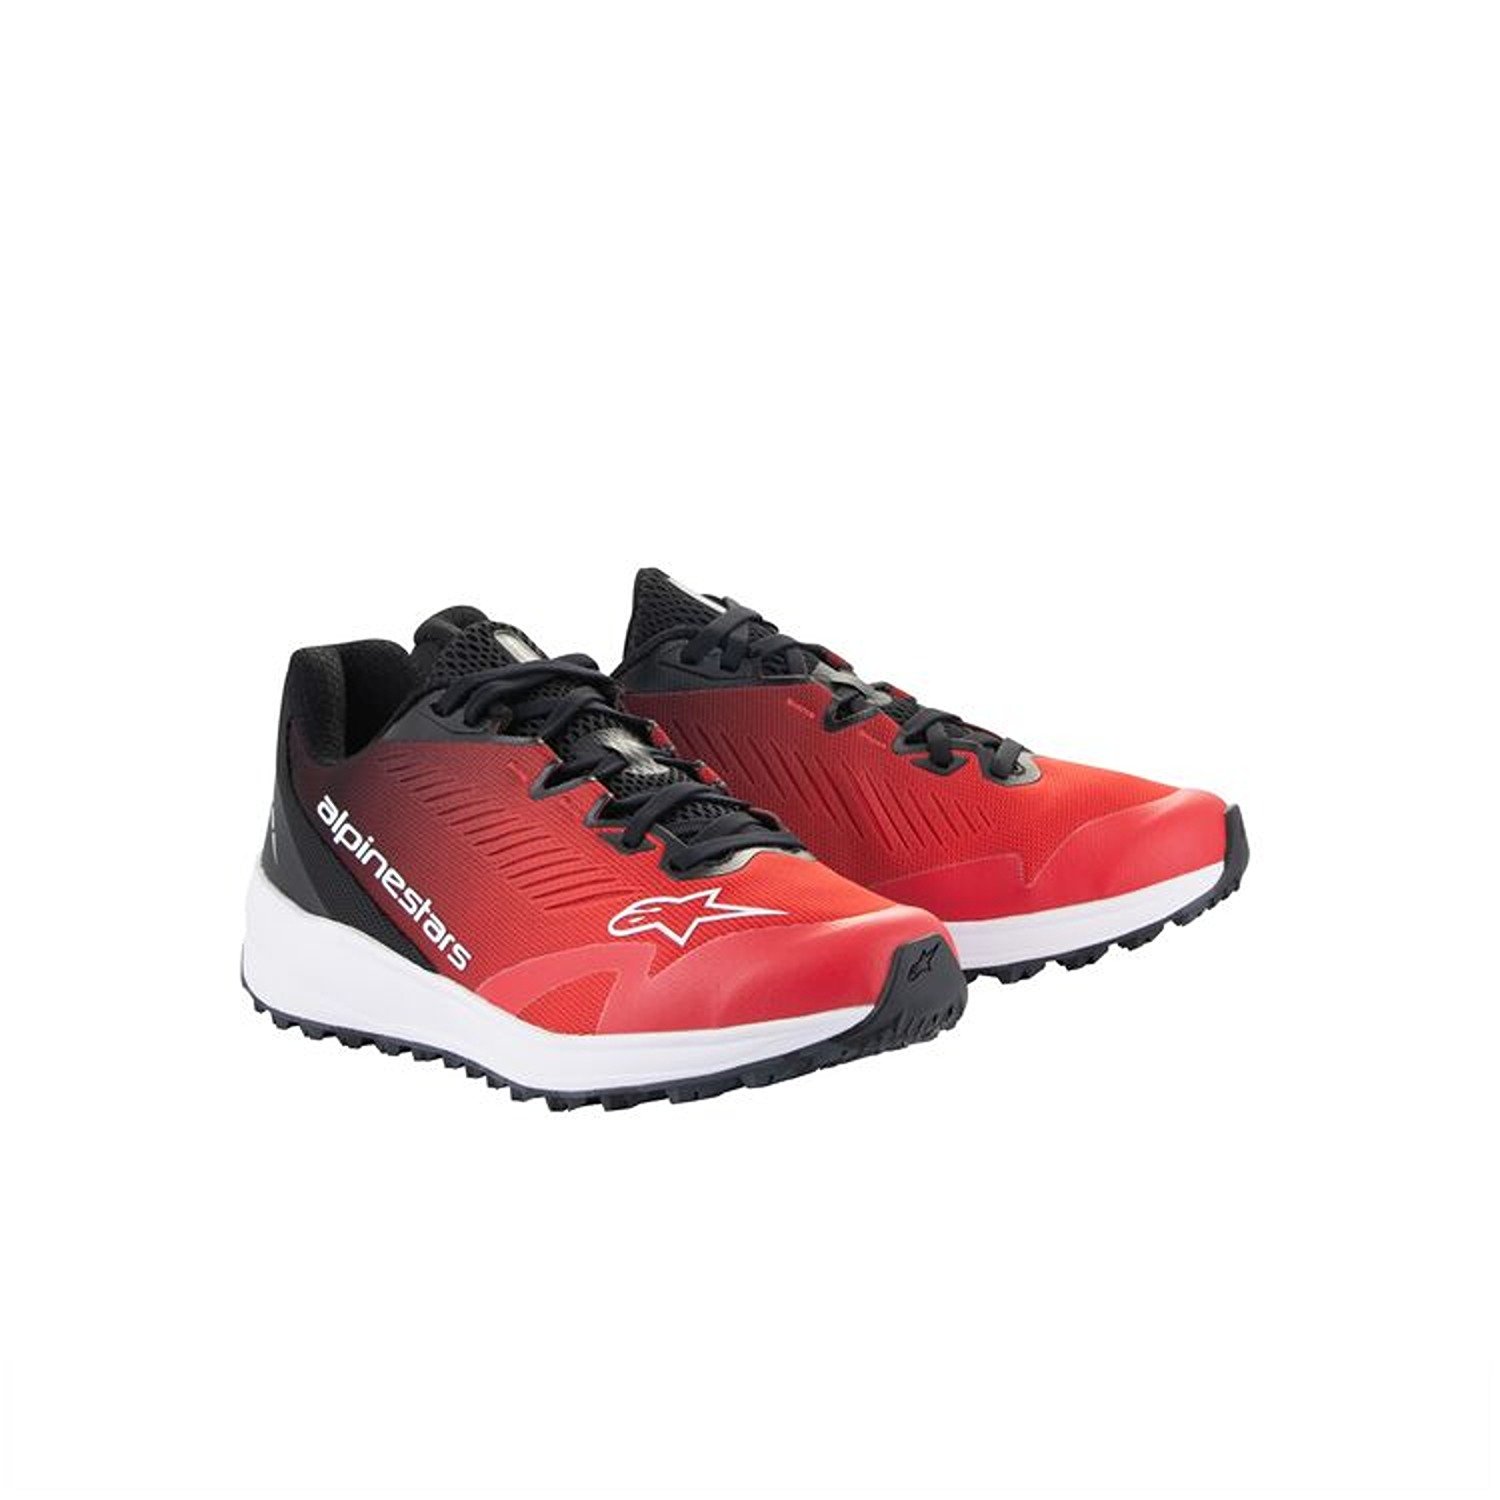 Image of Alpinestars Meta Road V2 Shoes Red Black White Taille US 65